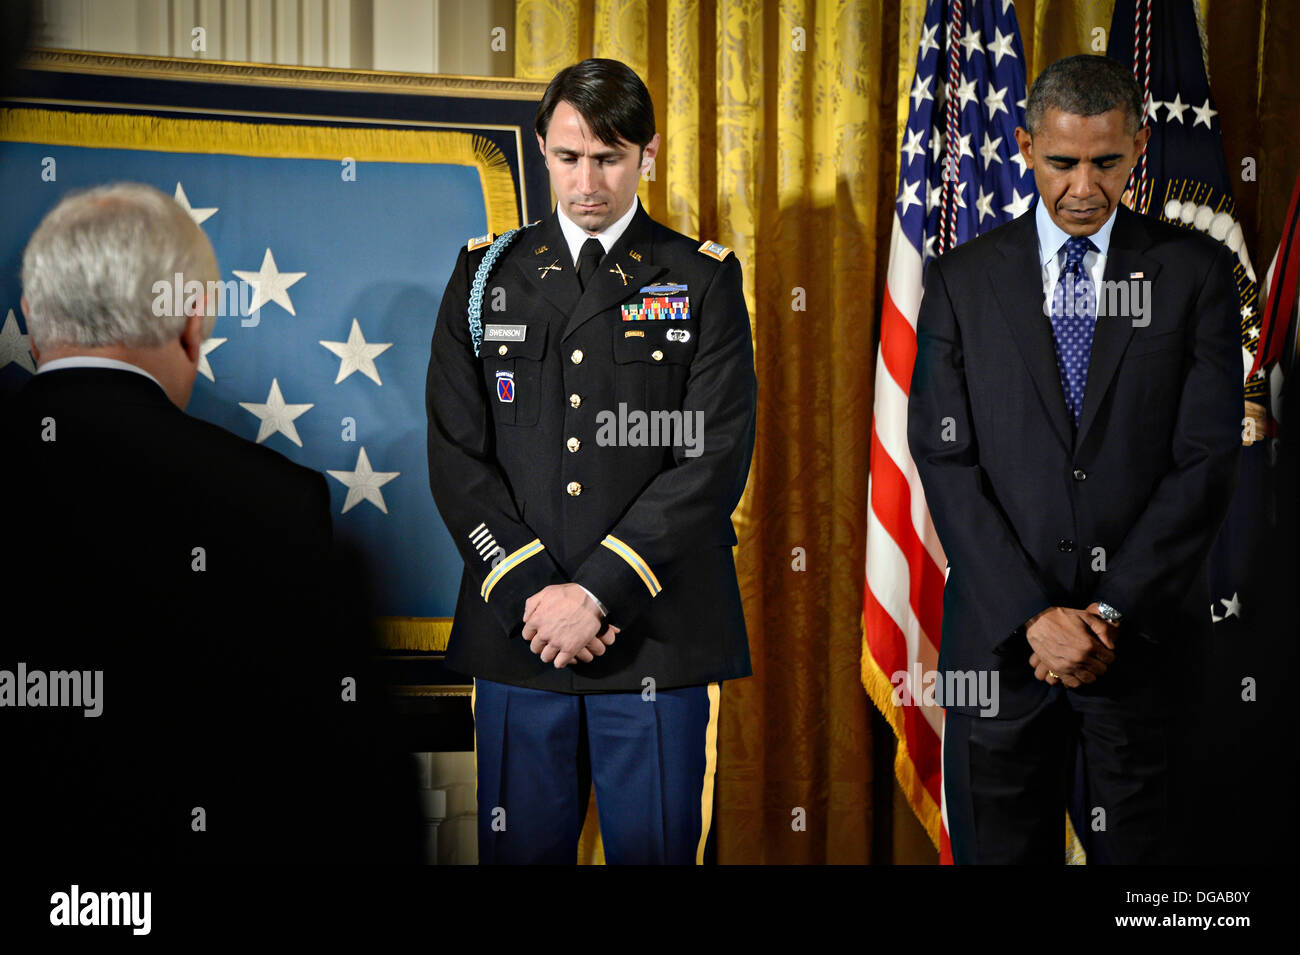 US President Barack Obama and former US Army Capt. William D. Swenson stand for a moment of silence during the Medal of Honor ceremony in the East Room of the White House October 15, 2013 in Washington, DC. The Medal of Honor is the nation's highest military honor. Stock Photo